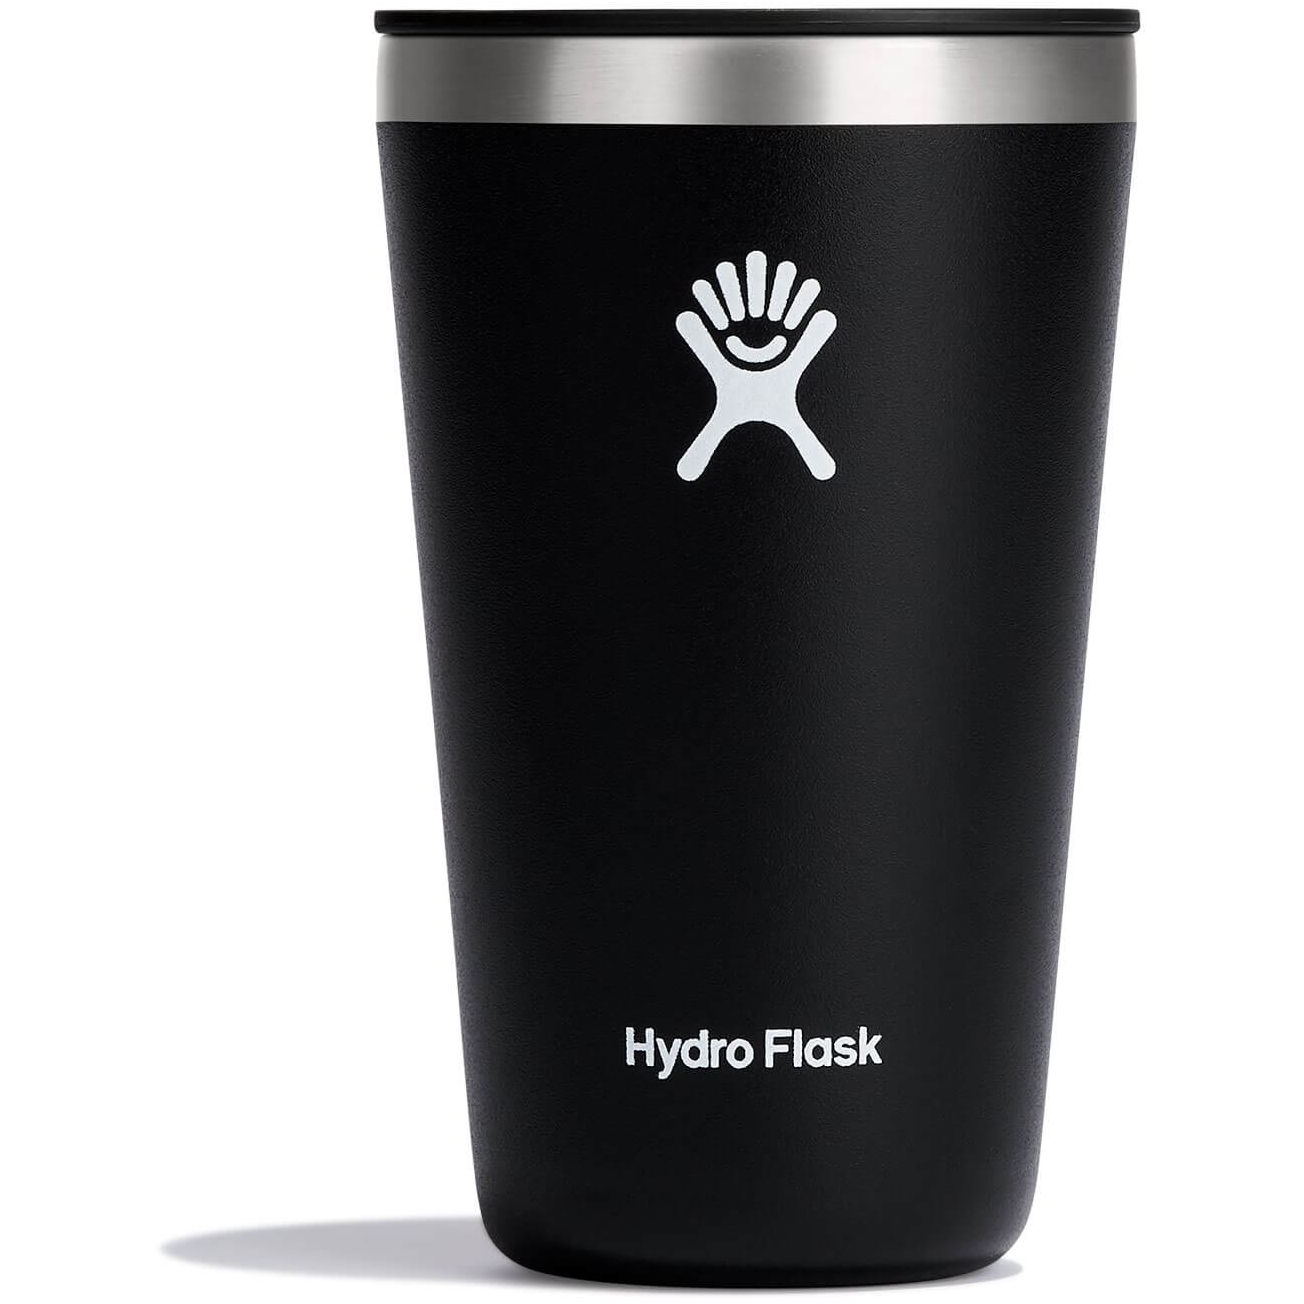 Hydro Flask's Tumbler Is the Best Insulating Cup